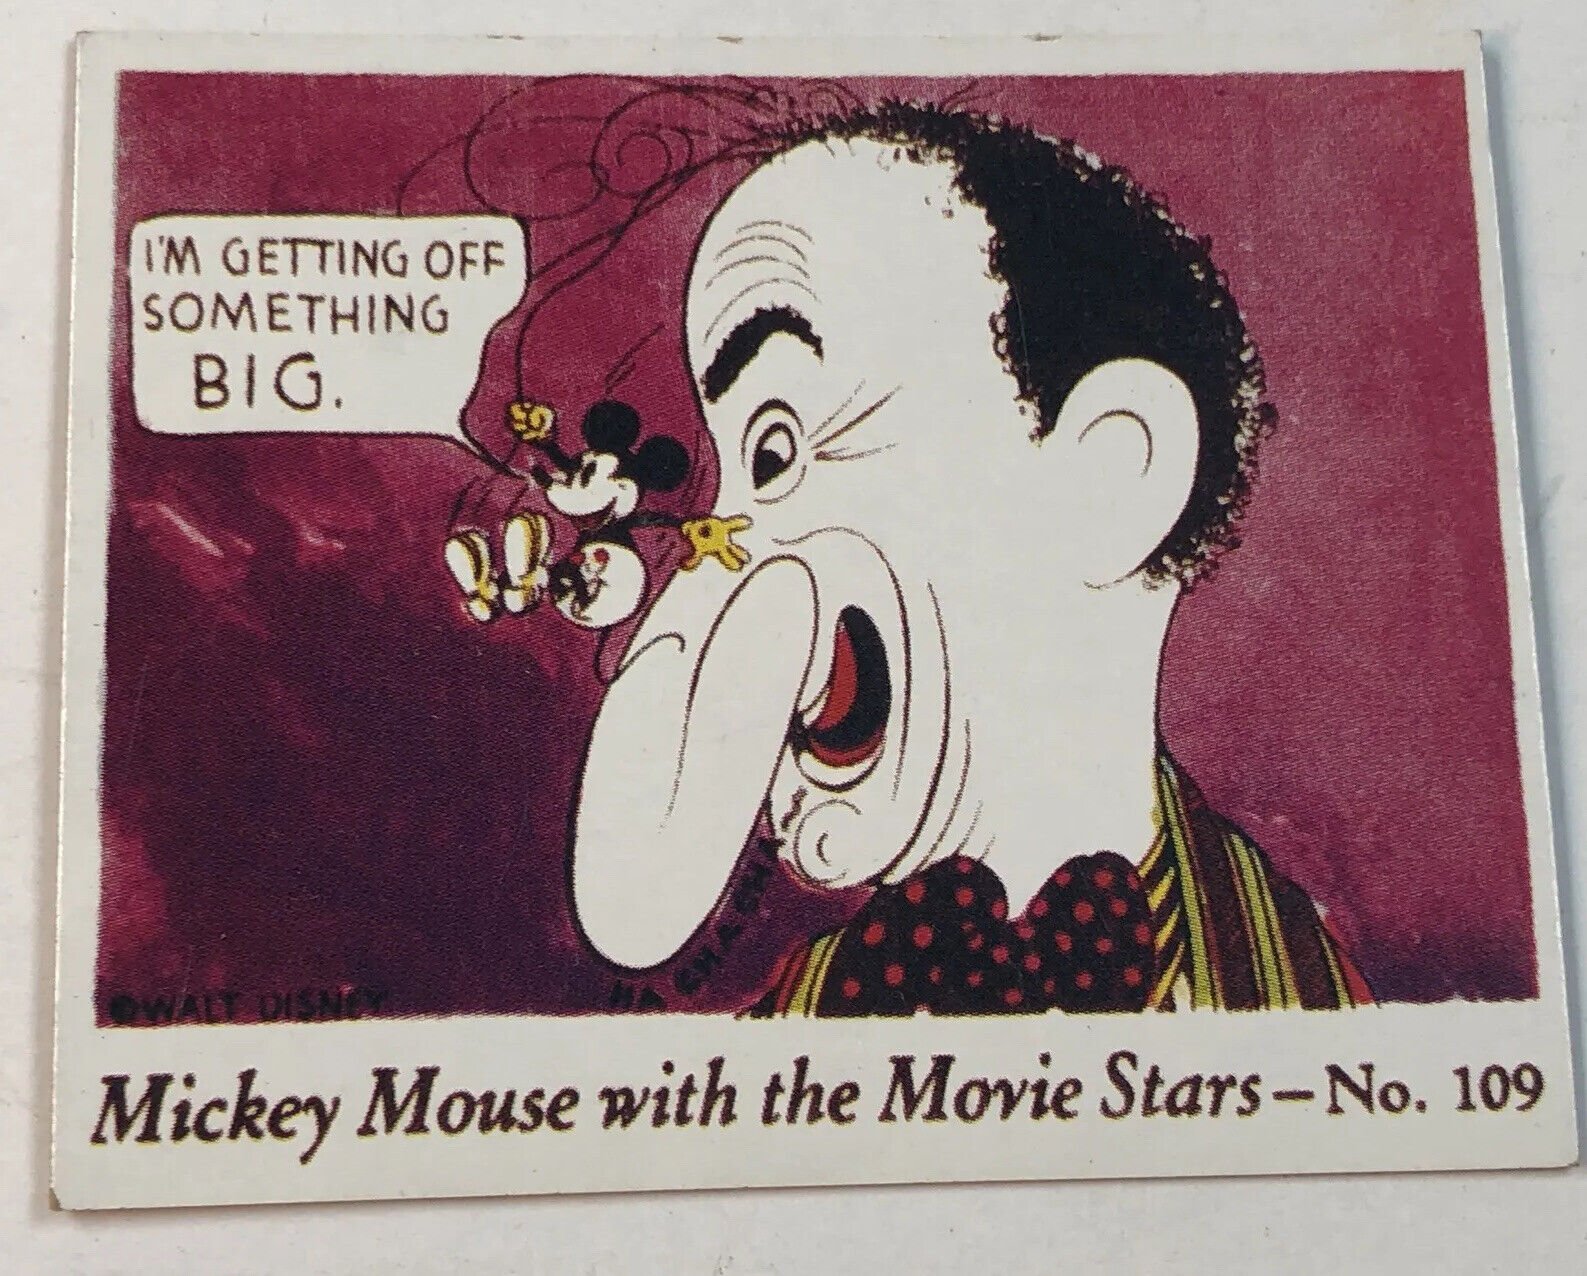 Reissue Of Rare #109 Mickey Mouse with the Movie Stars (Jimmy Durante) Rare